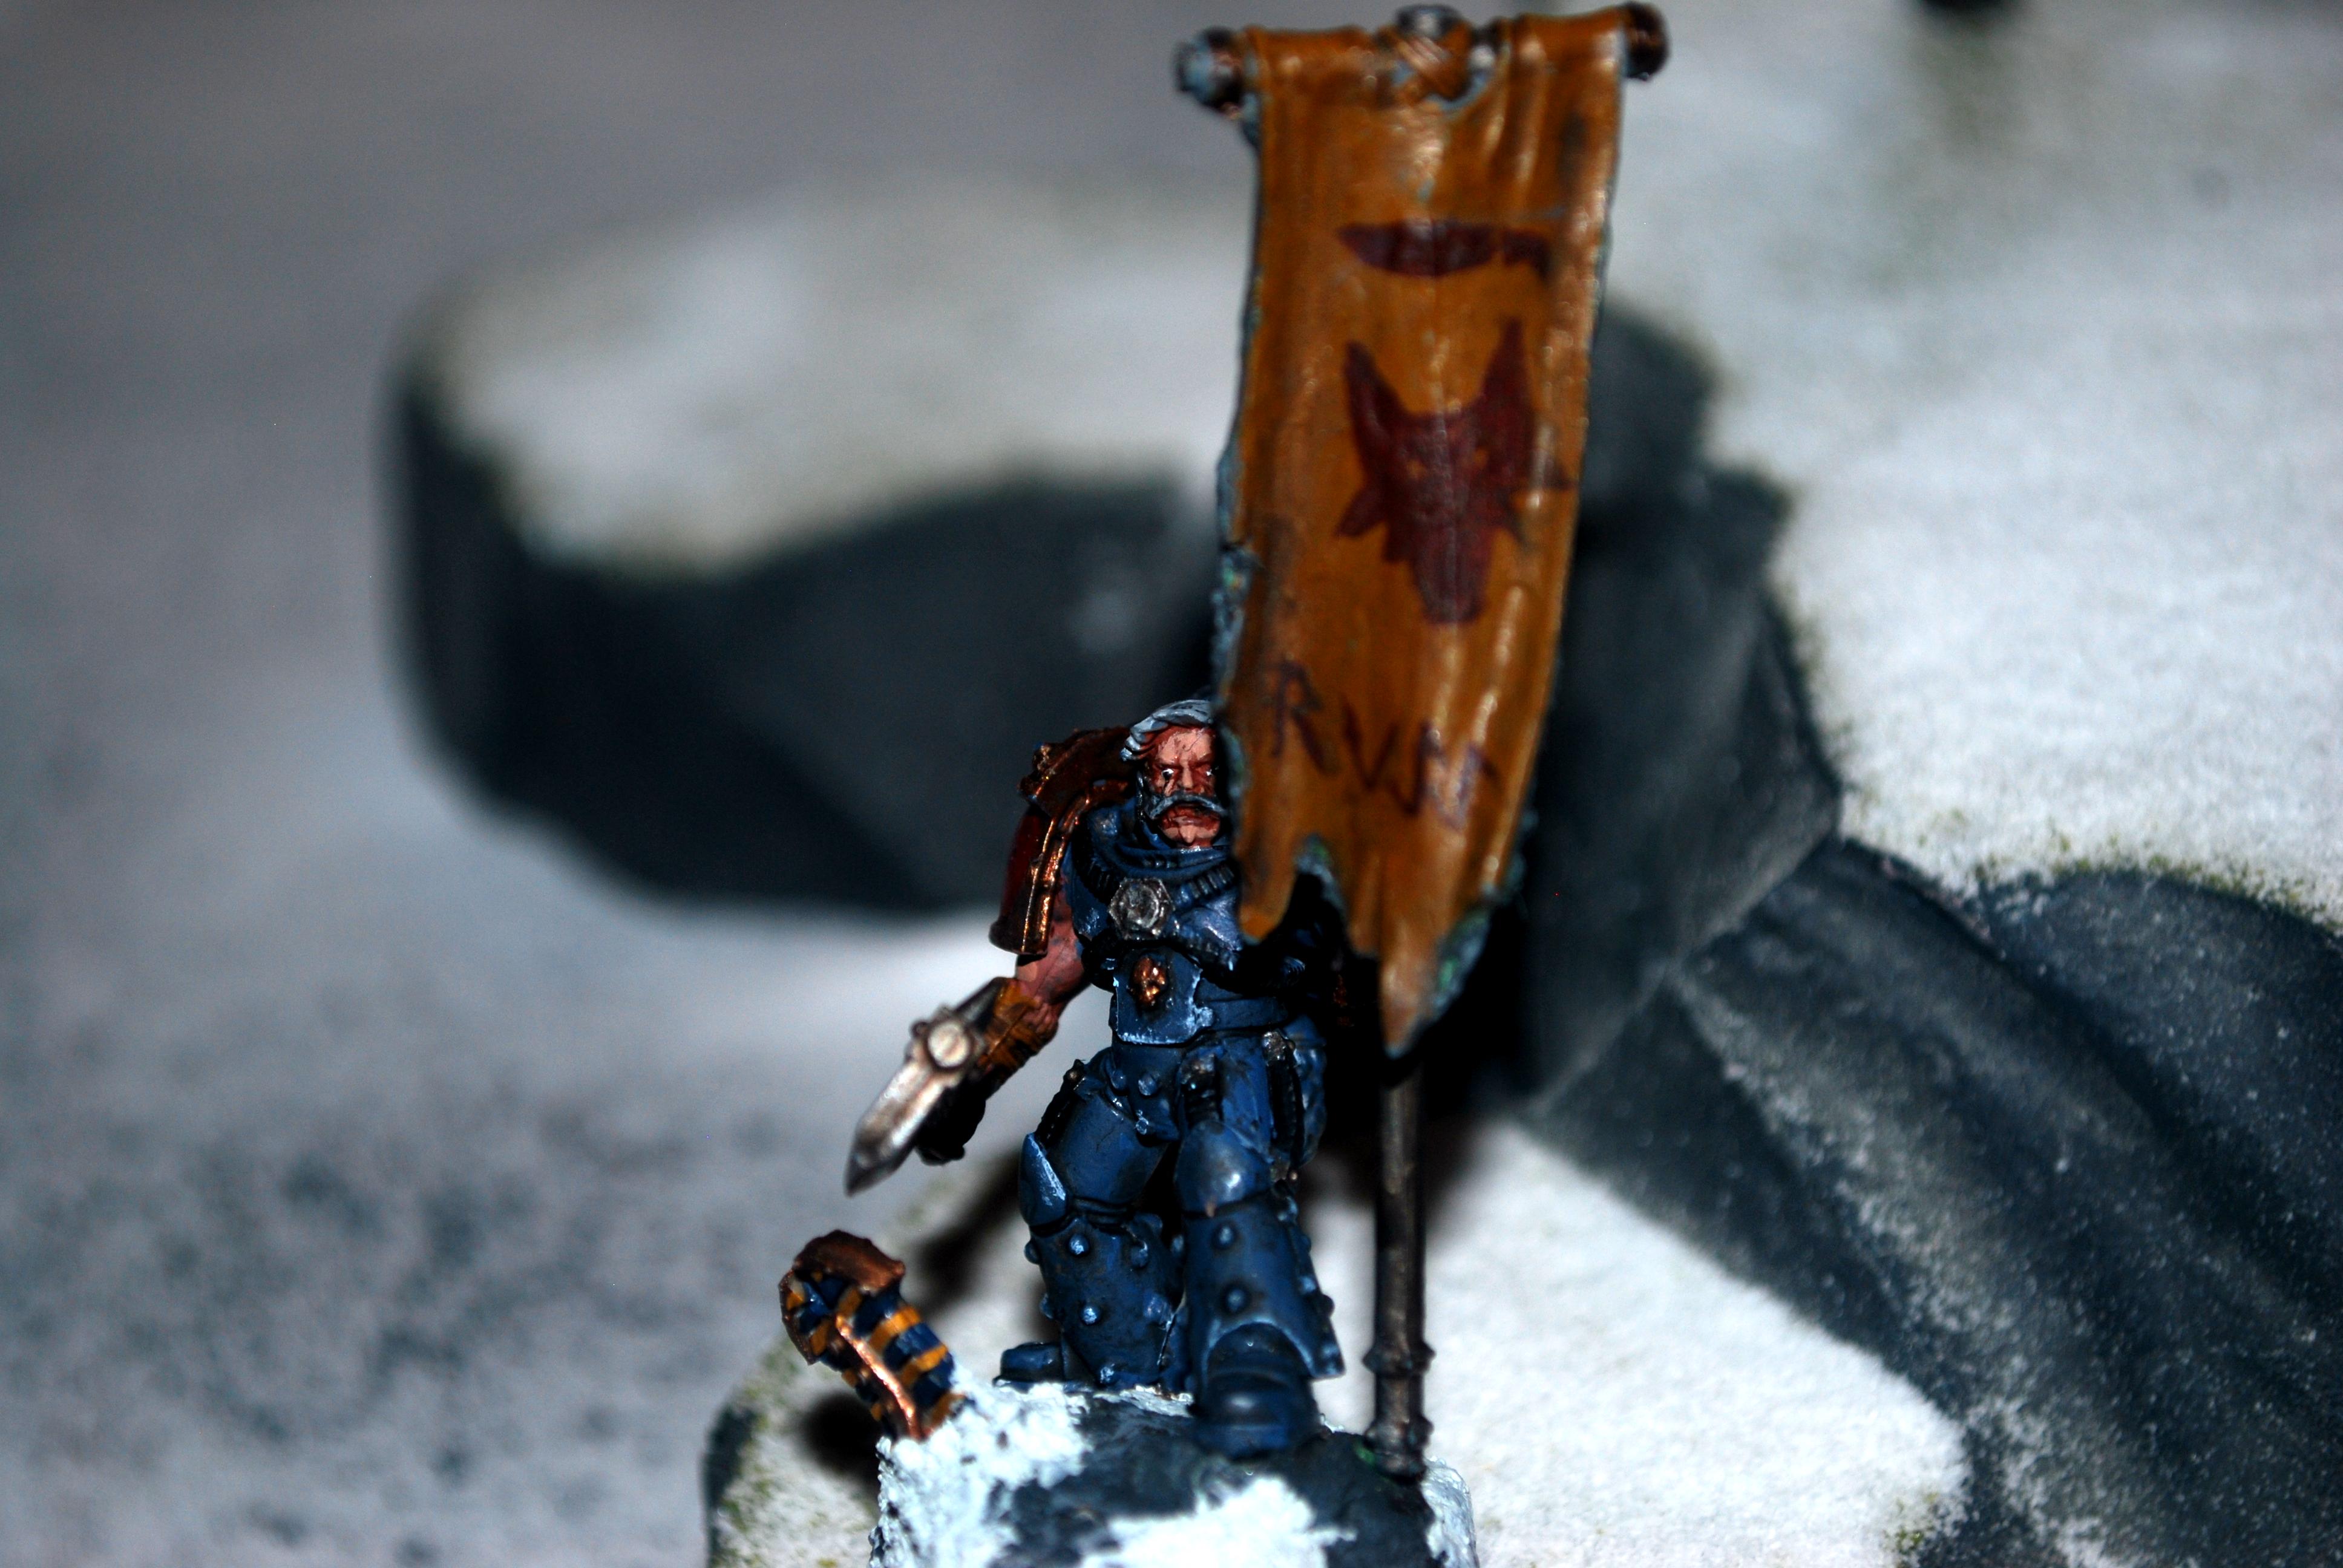 Axe, Banner, Bash, Conversion, Coversion, Death, Deathwolf, Flag, Forge, Forge World, Free, Freehand, Gray, Grey, Hand, Herald, Hunter, Kit, Sons, Space, Space Marines, Standard, Thousand, Winter, Wolf, World